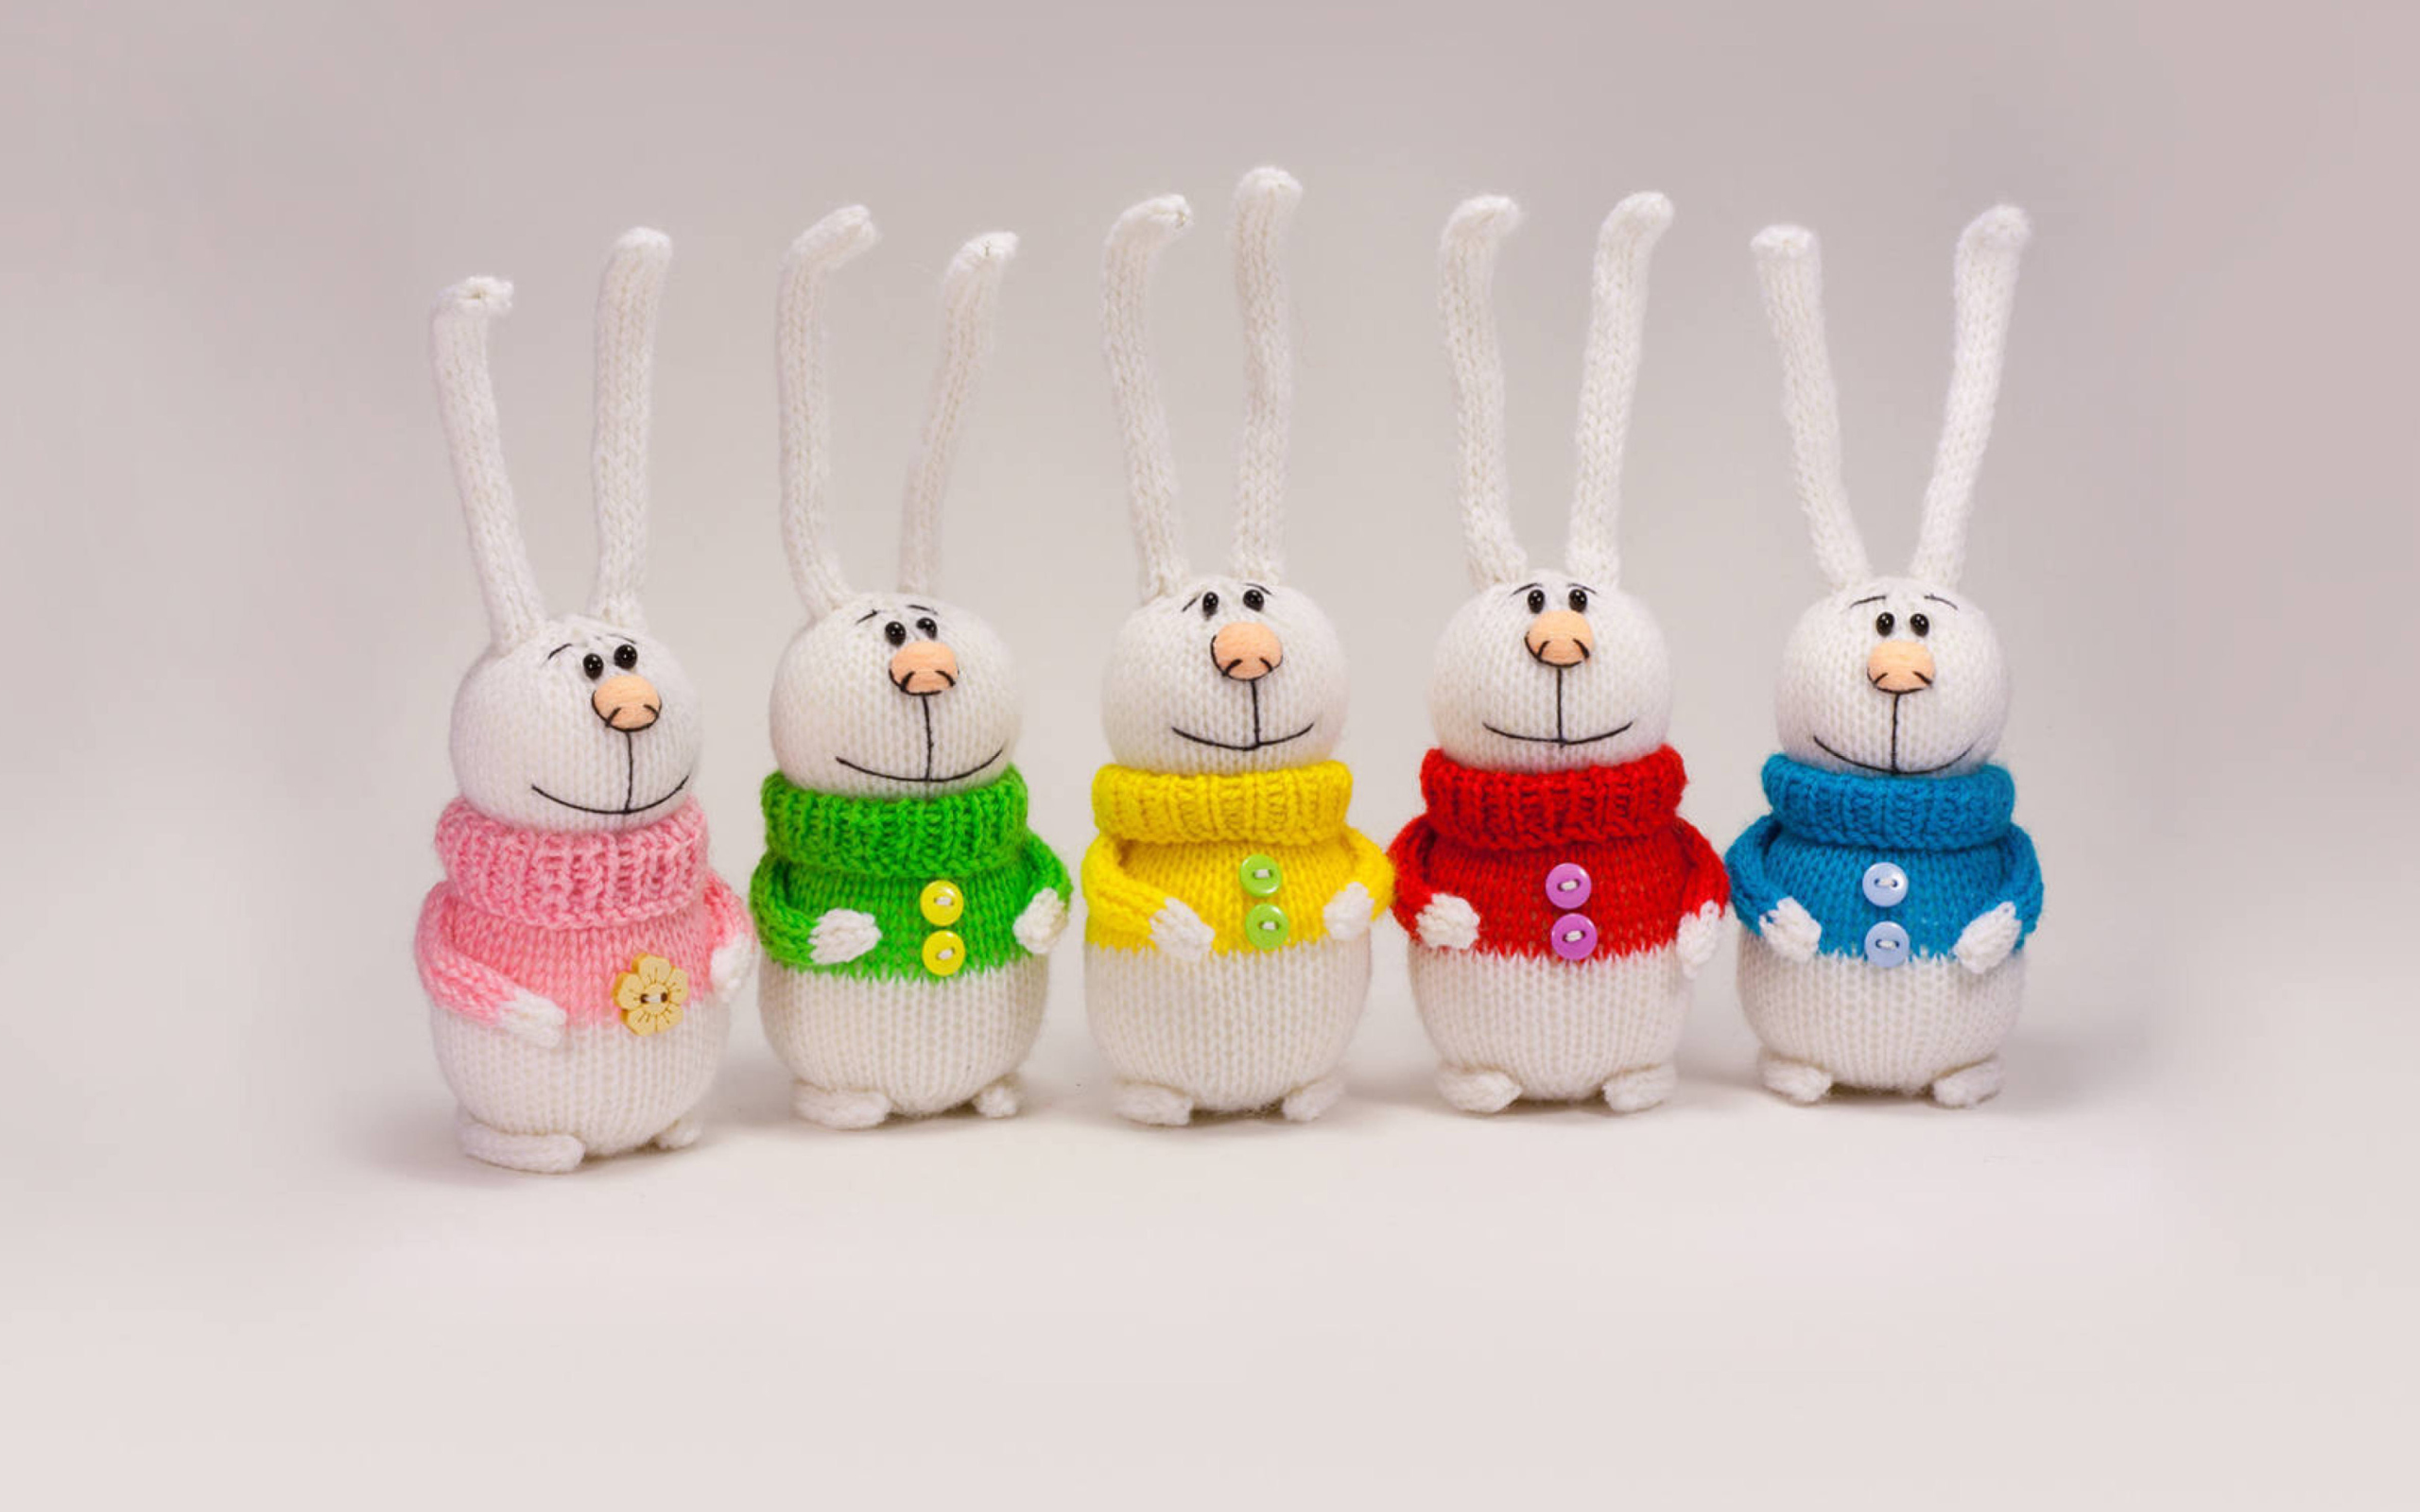 Knitted Bunnies In Colorful Sweaters wallpaper 2560x1600